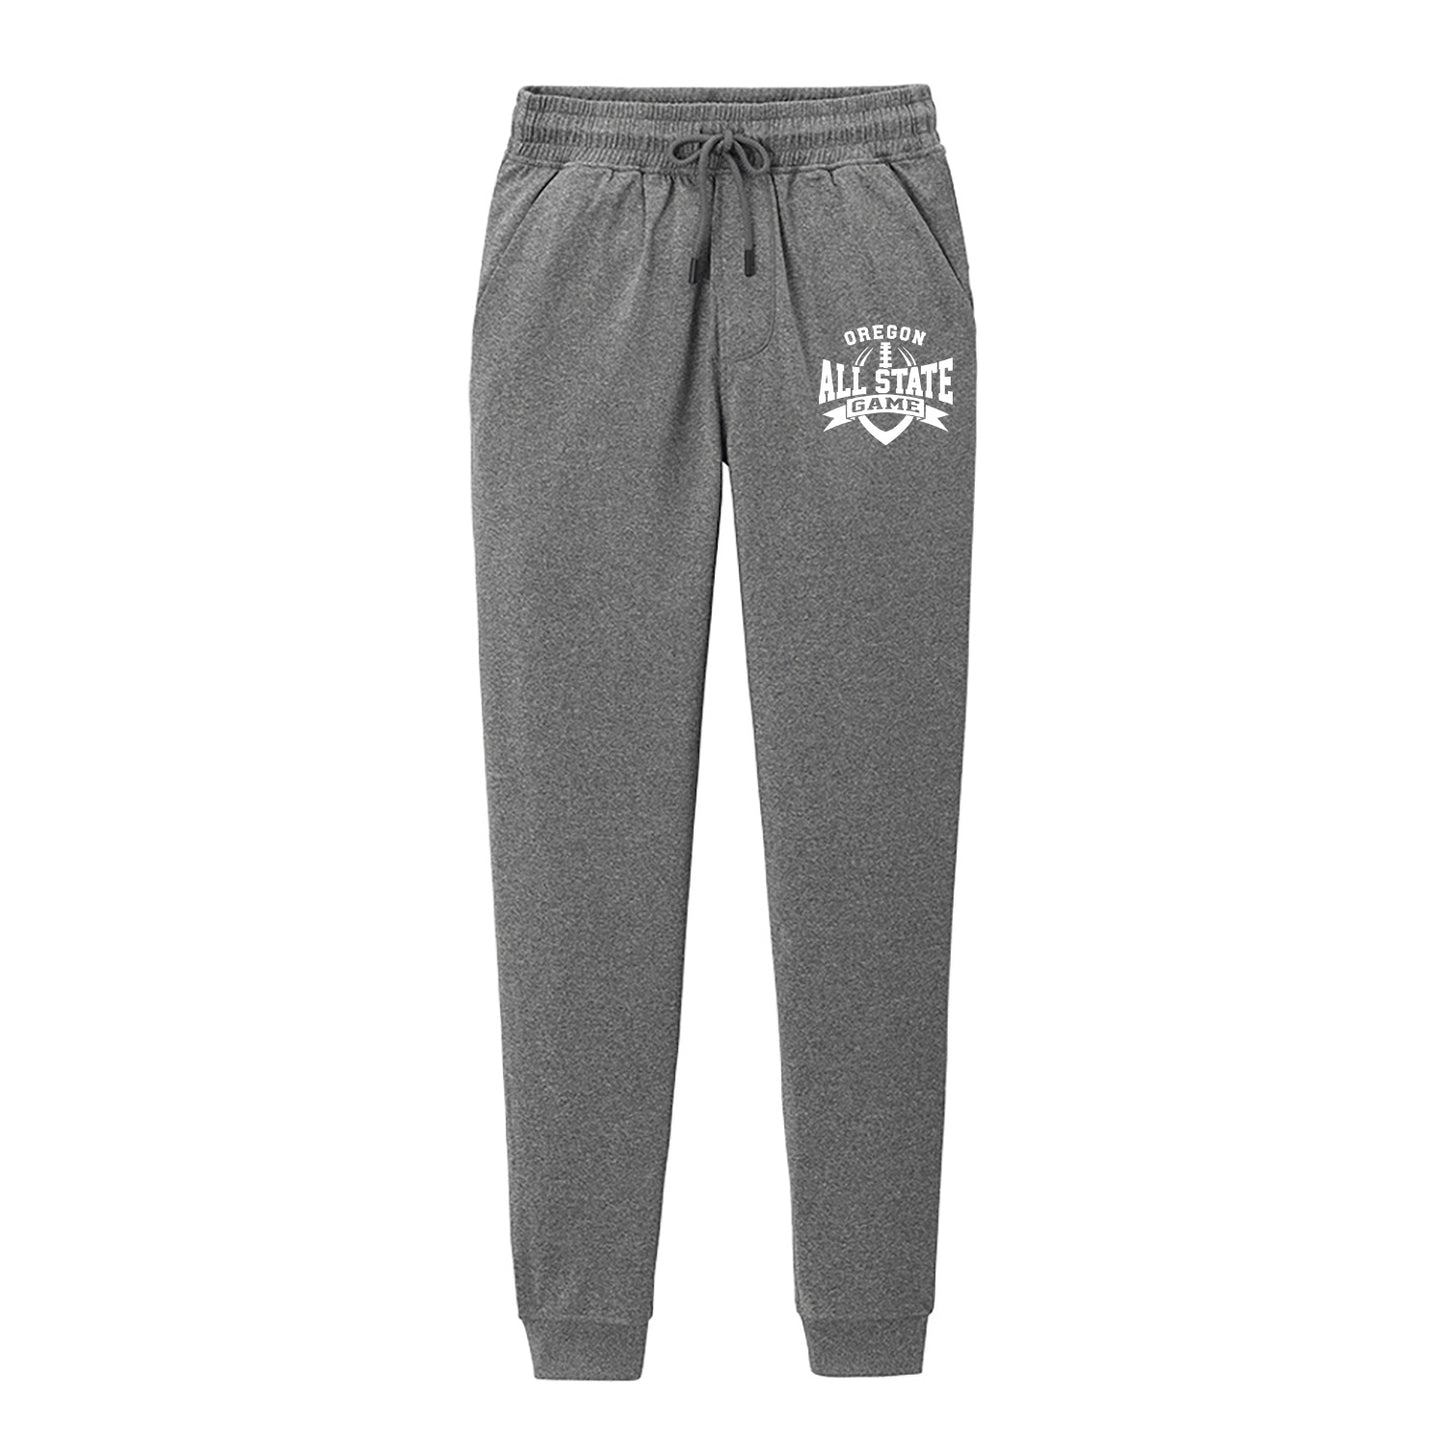 Oregon All State - Polyester Stretch Jogger - 2 colors available